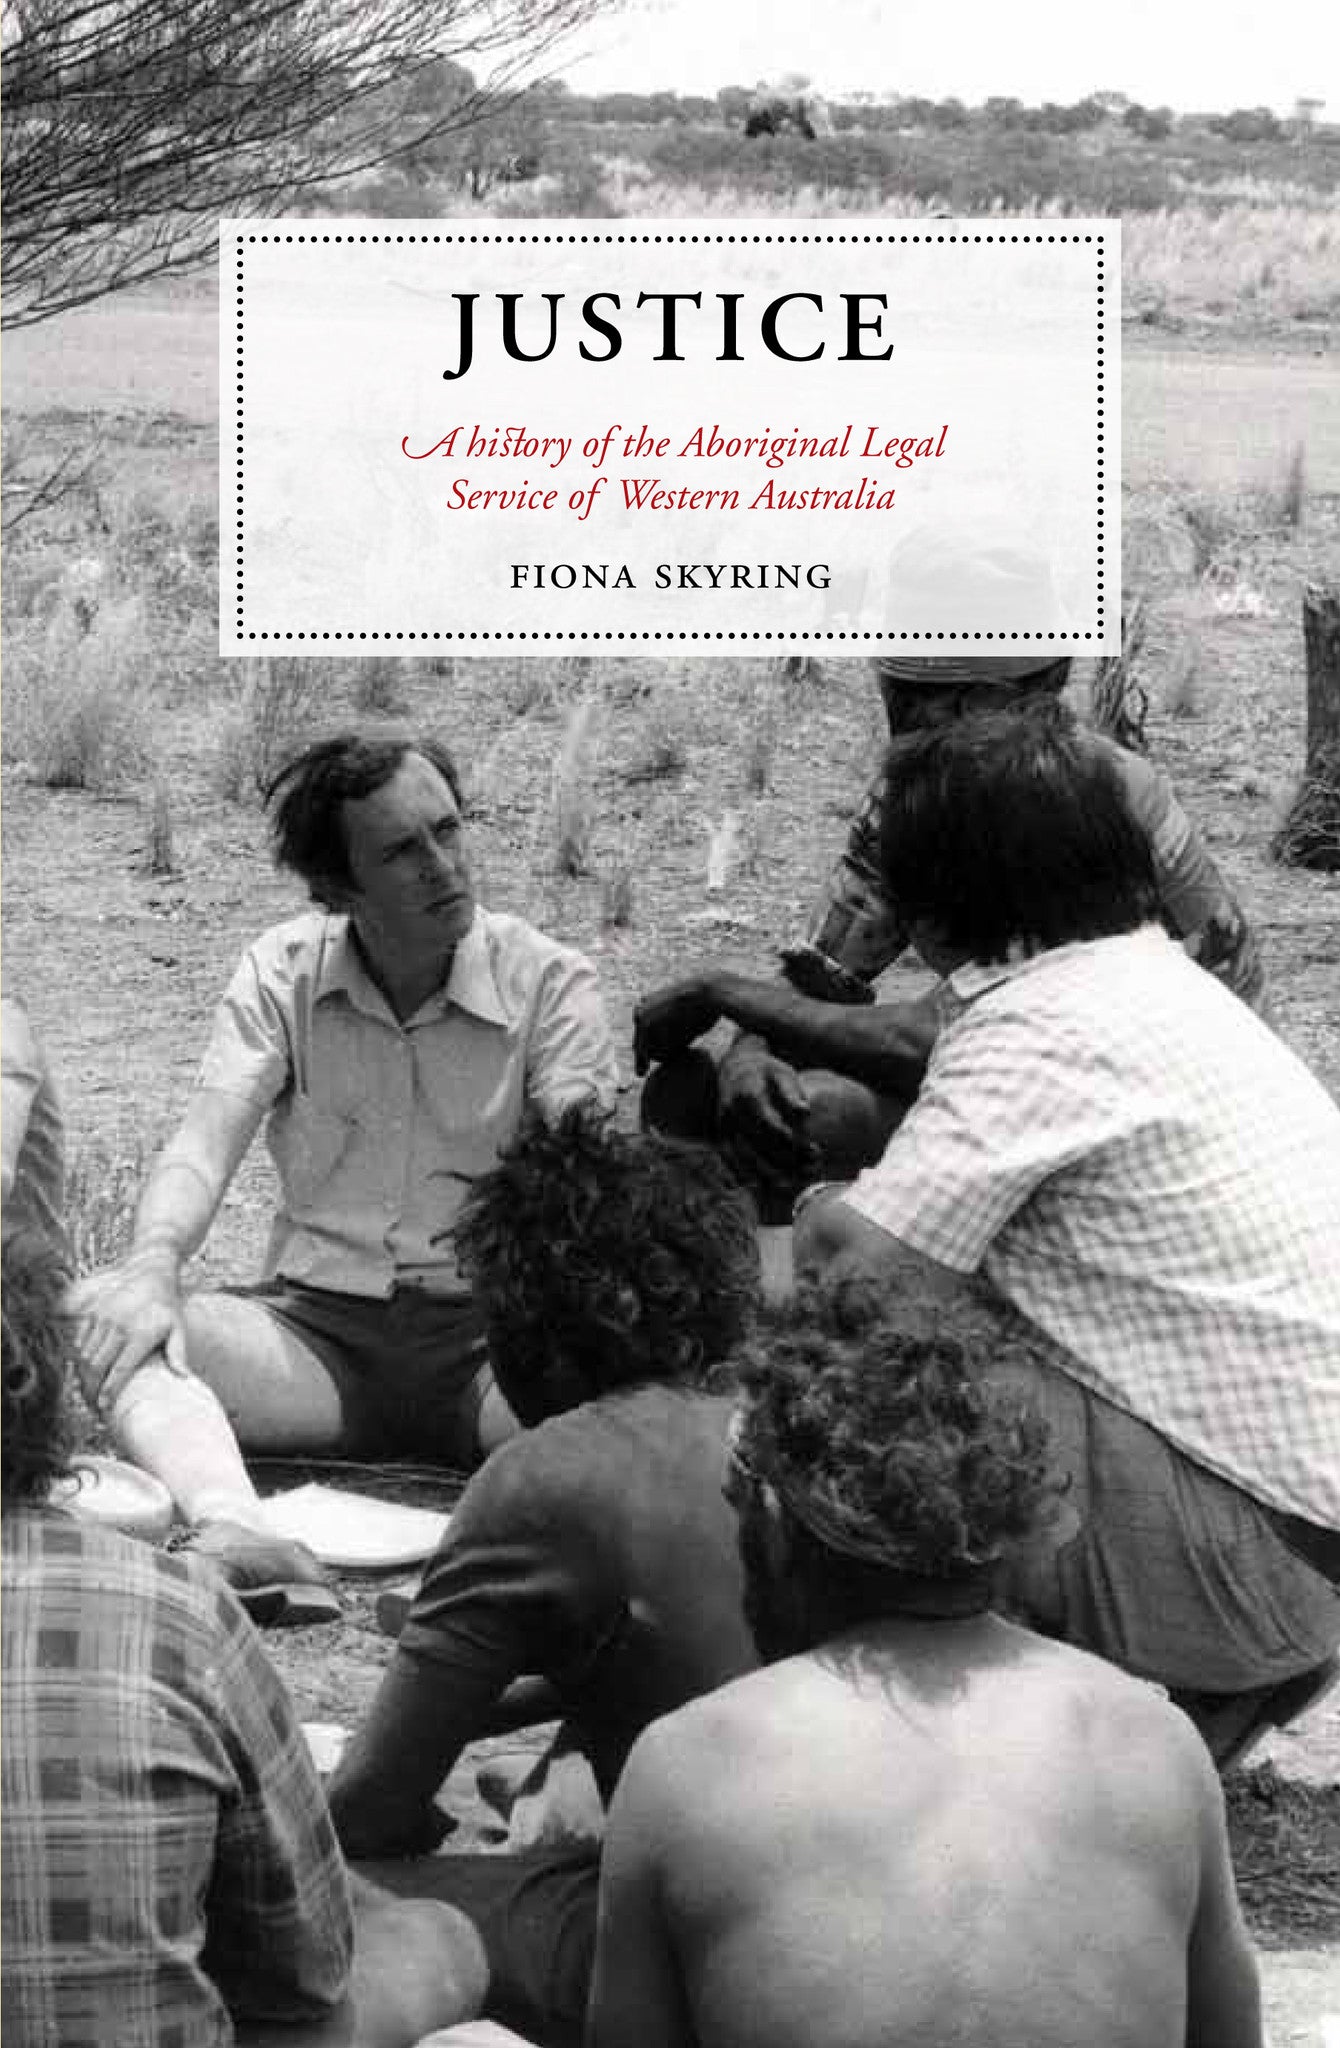 Justice: A history of the Aboriginal Legal Service of Western Australia